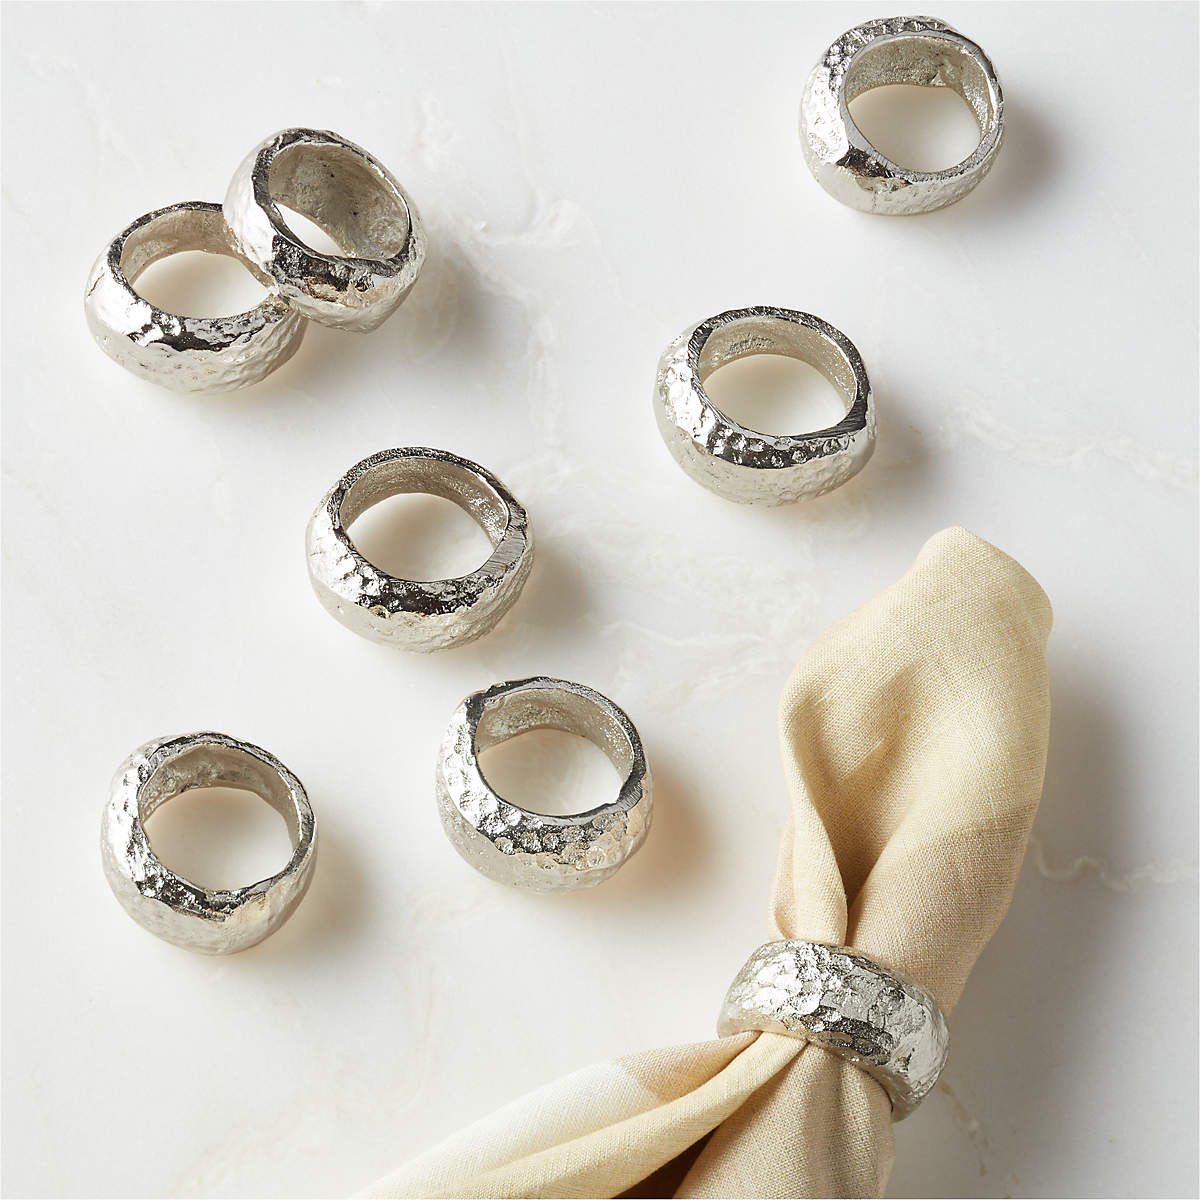 Dynasty Pitted Platinum Napkin Rings Set of 8